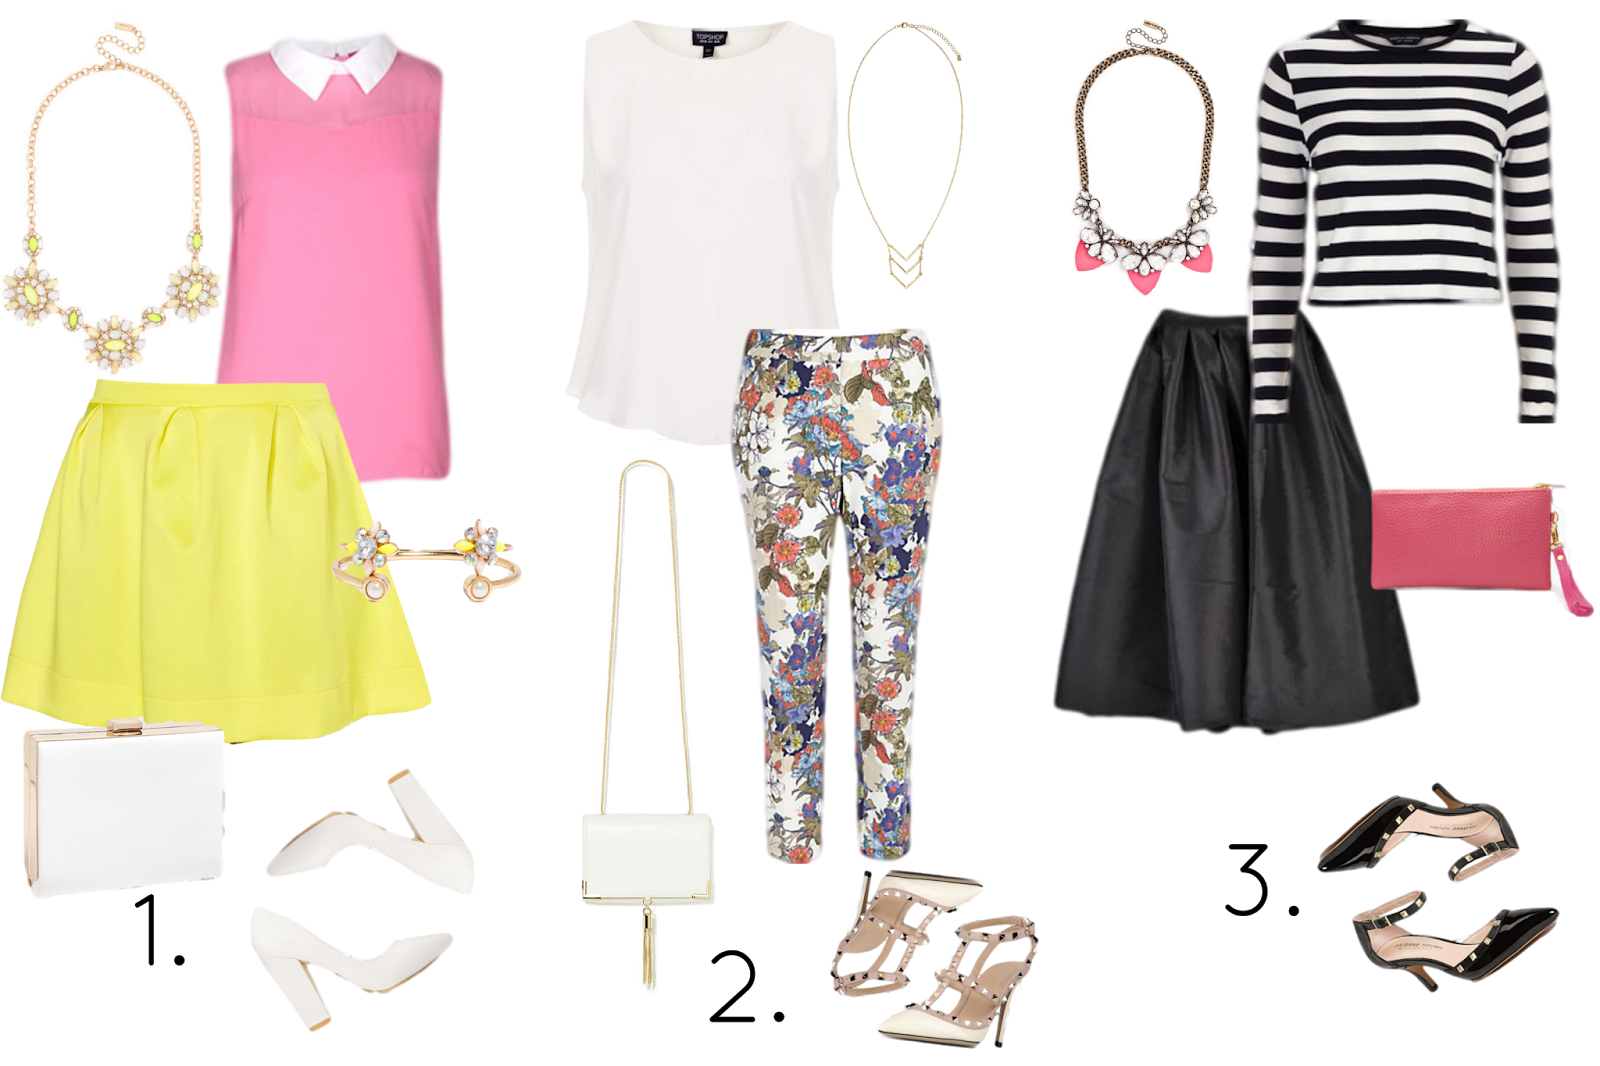 Jasmin daily : FRIDAY FINDS: EASTER OUTFIT EDITION